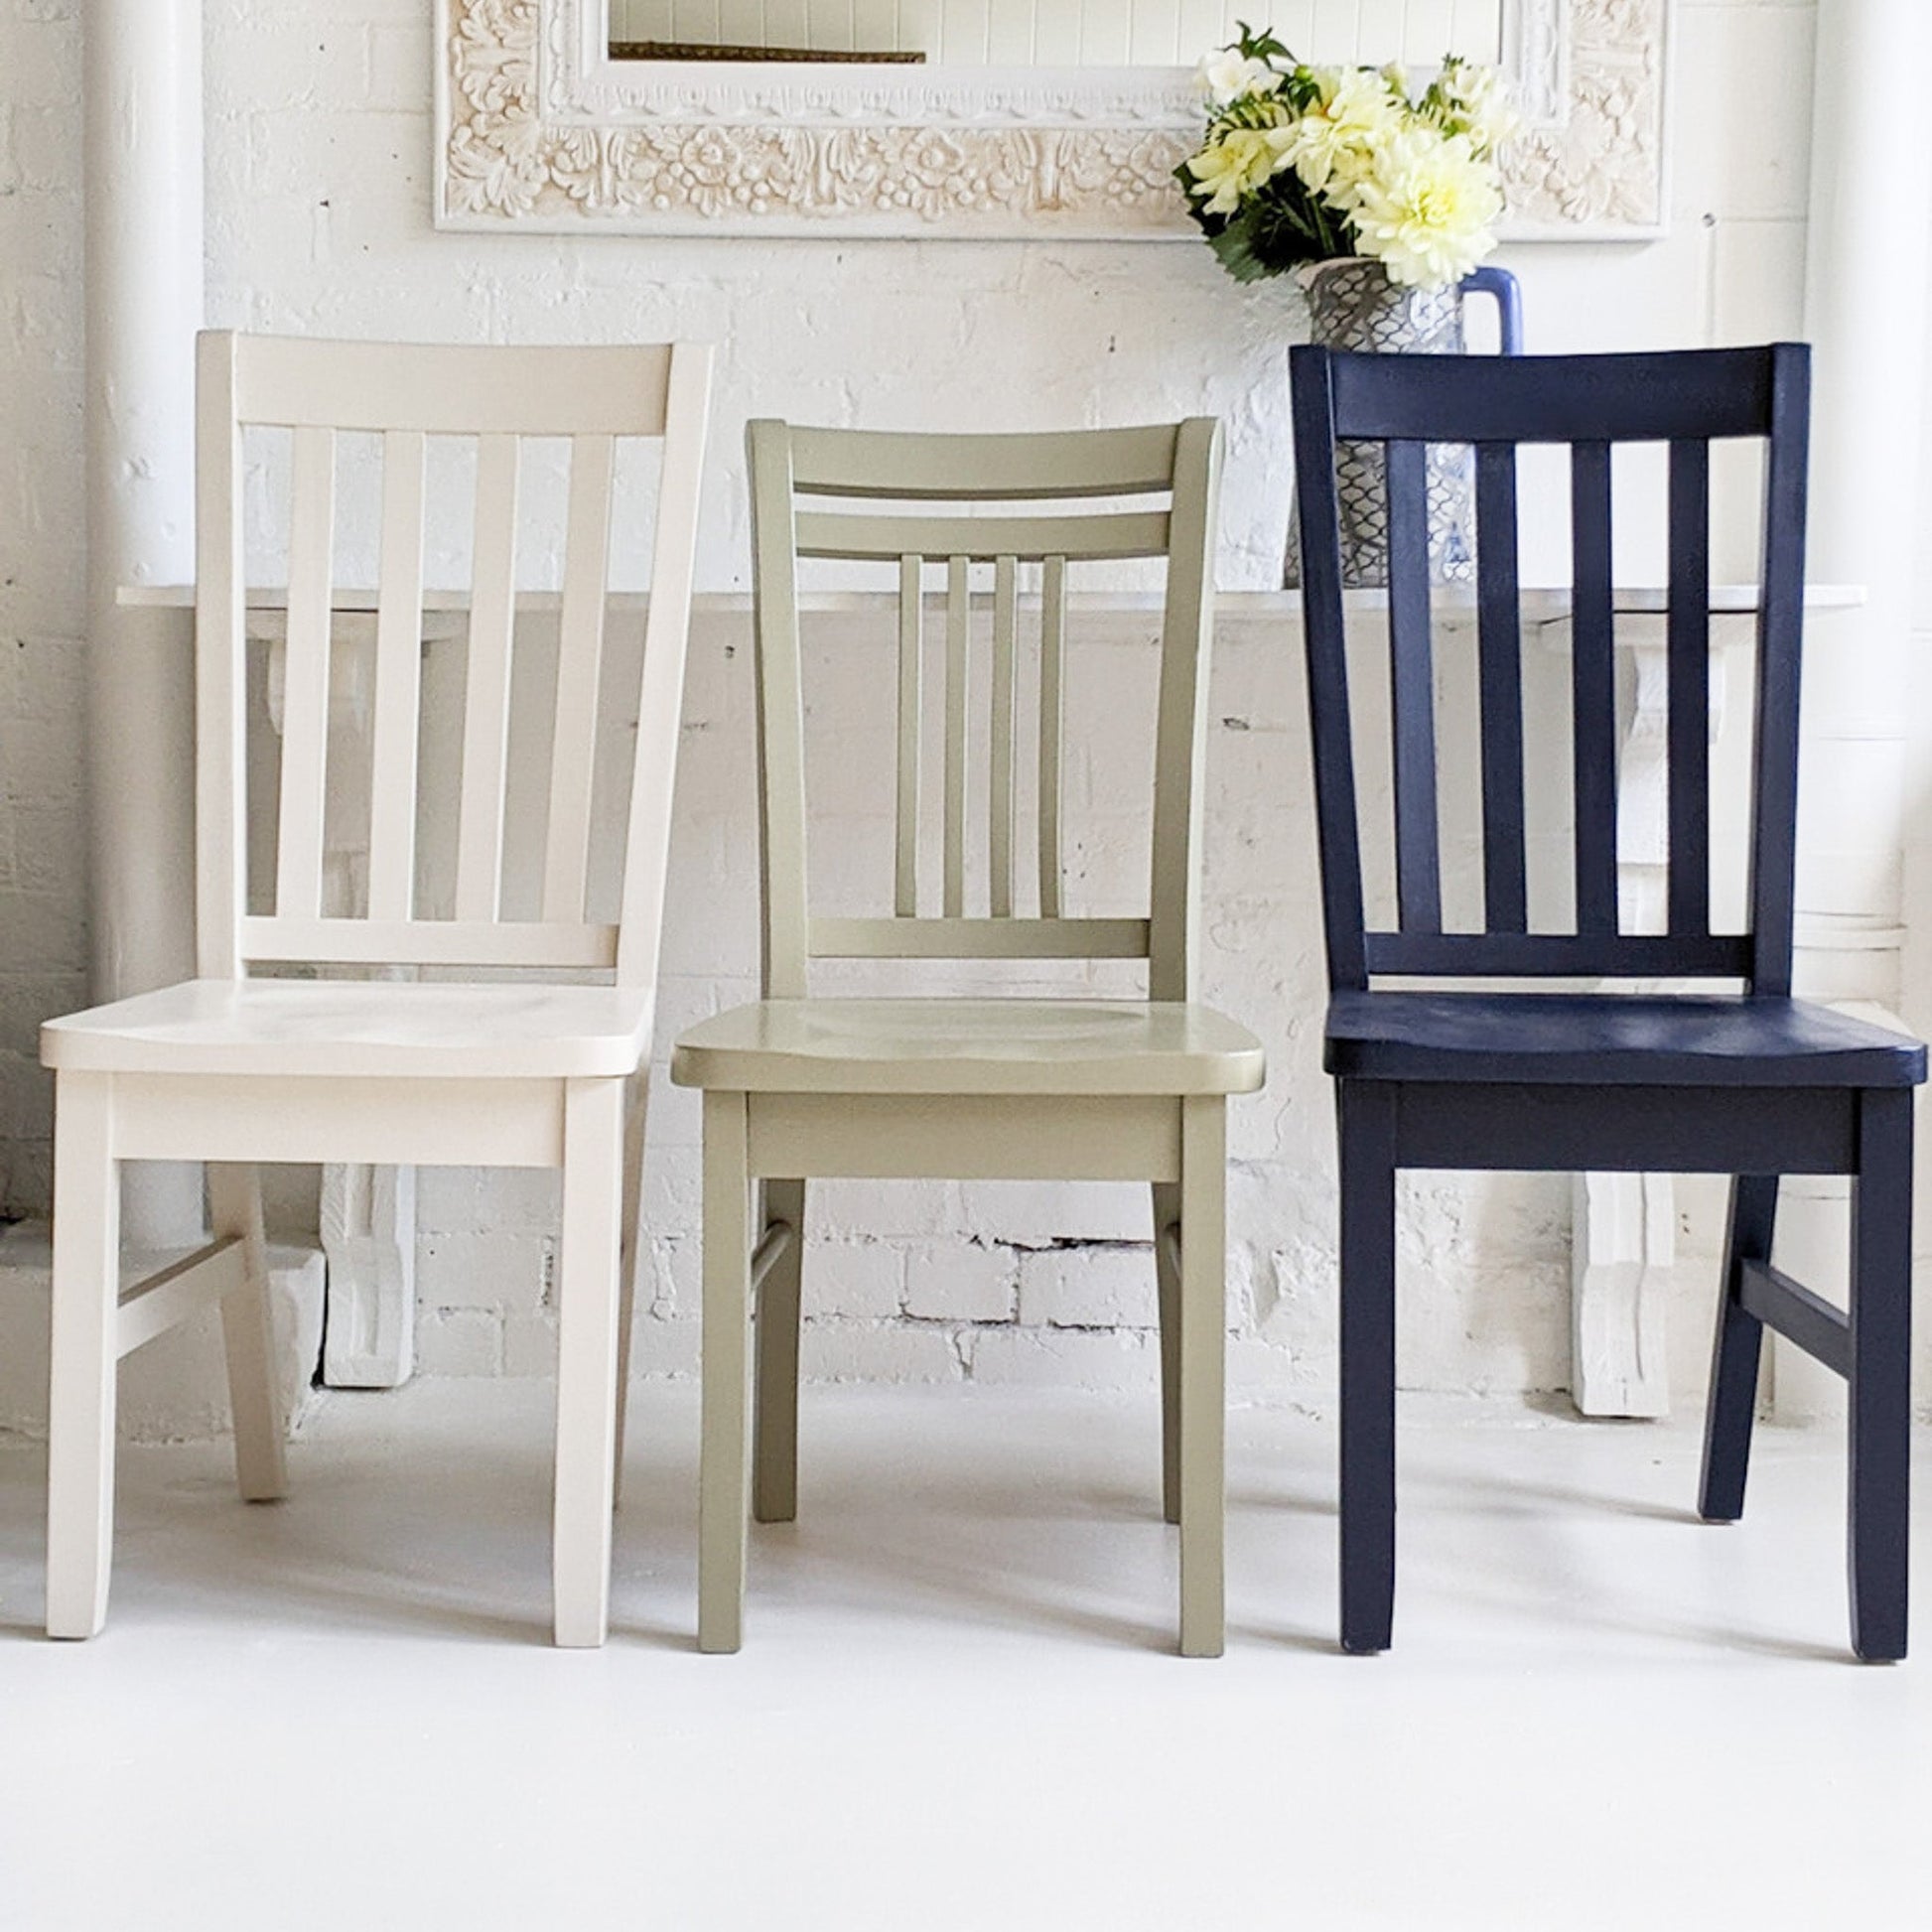 three timber chairs painted Ink Navy, Sage and Hampton using Blake & Taylor Chalk Furniture Paint